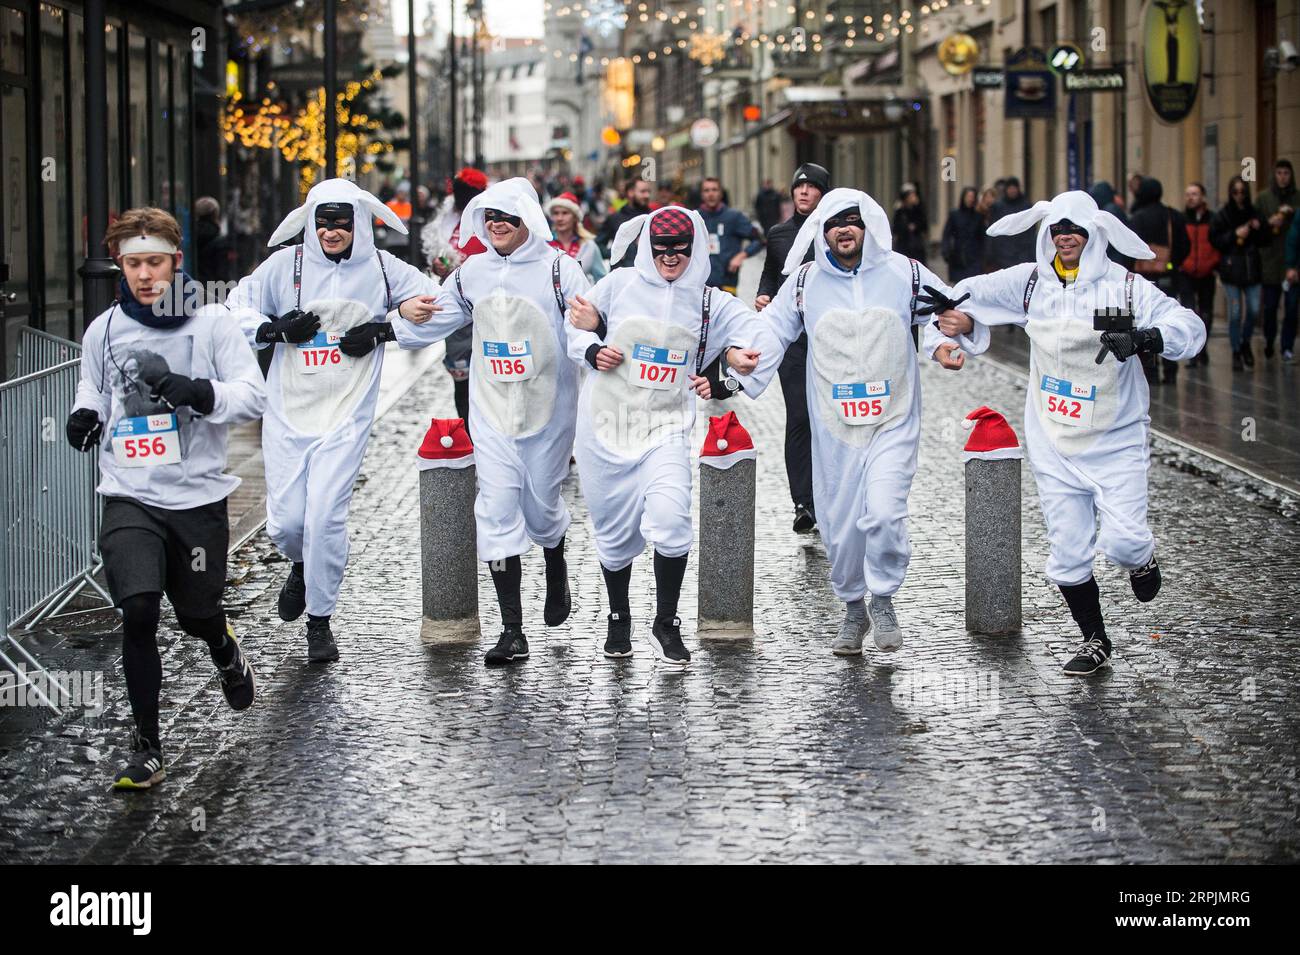 191215 -- VILNIUS, Dec. 15, 2019 Xinhua -- People attend the annual Christmas Run in Vilnius, Lithuania, on Dec. 15, 2019. About 3,800 people attended this year s race. Photo by Alfredas Pliadis/Xinhua LITHUANIA-VILNIUS-CHRISTMAS RUN PUBLICATIONxNOTxINxCHN Stock Photo